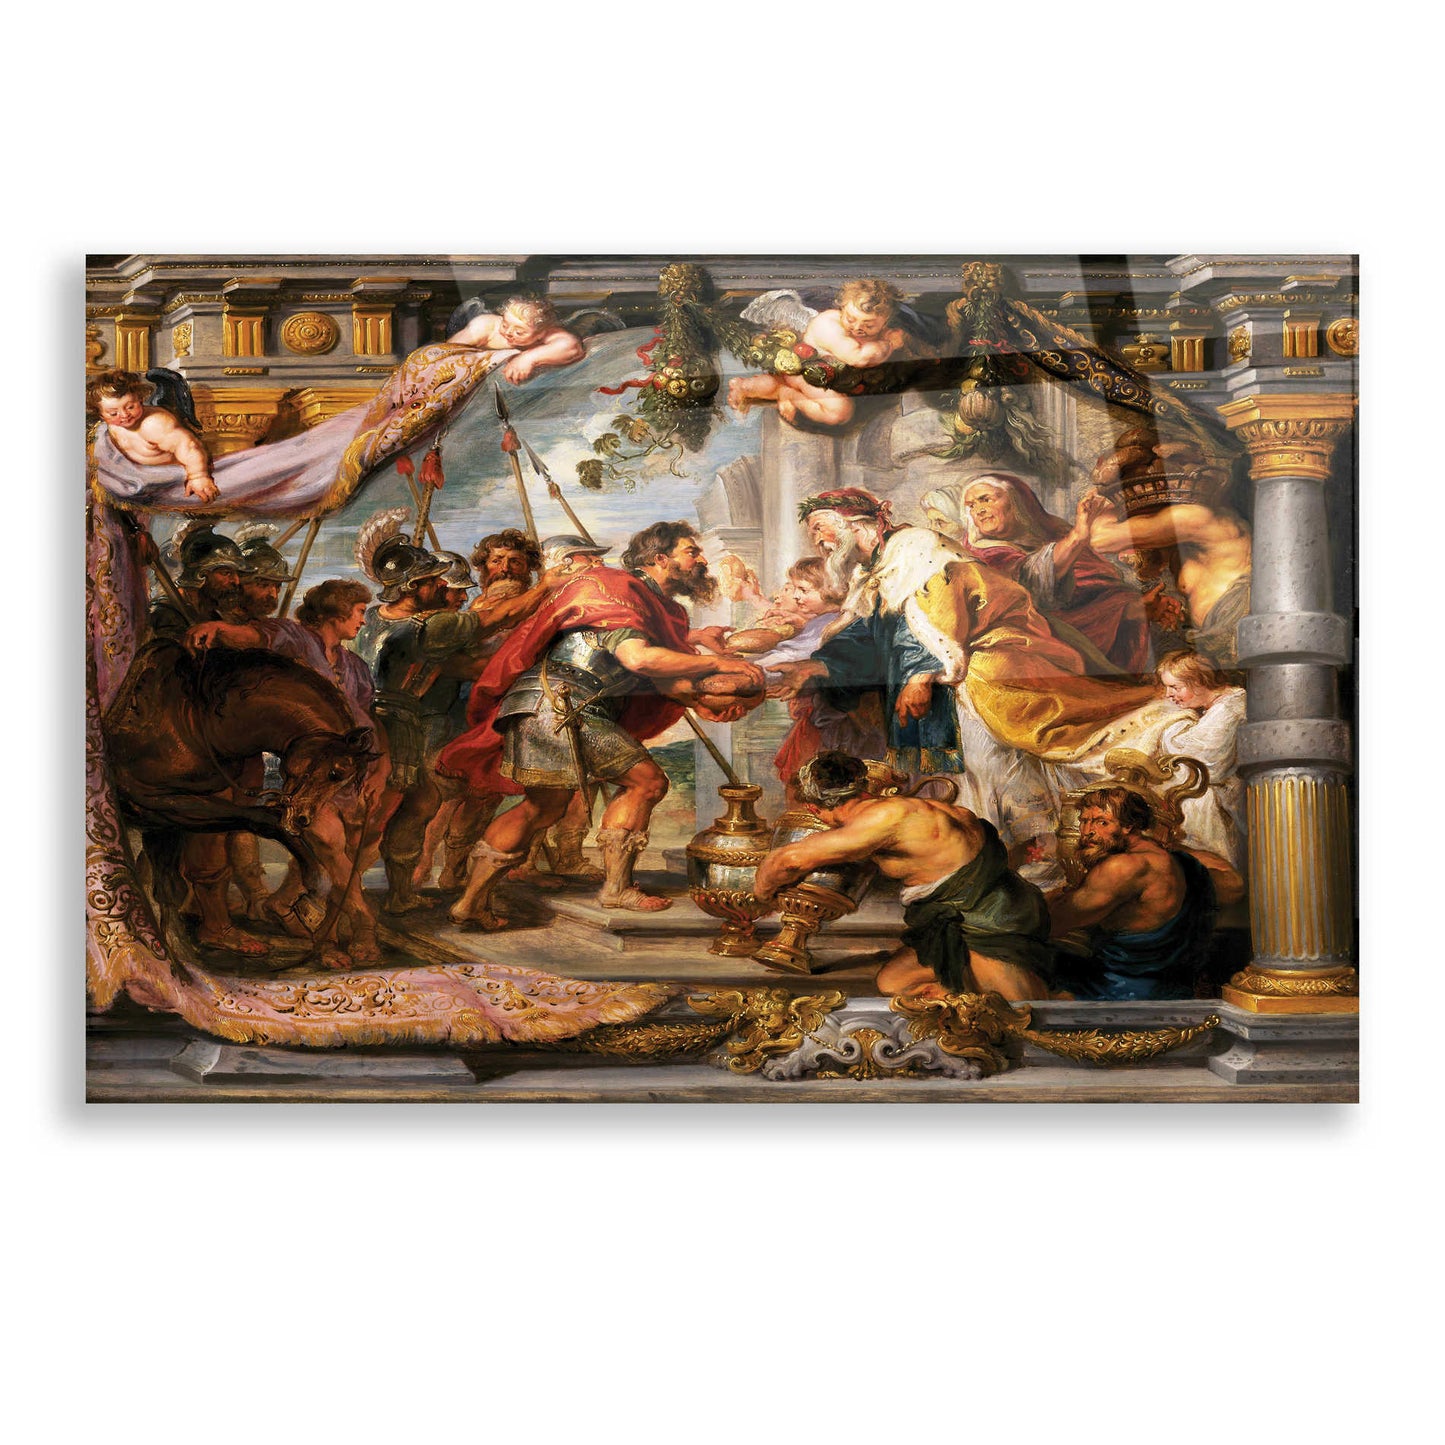 Epic Art 'The Meeting of David and Abigail' by Peter Paul Rubens, Acrylic Glass Wall Art,16x12